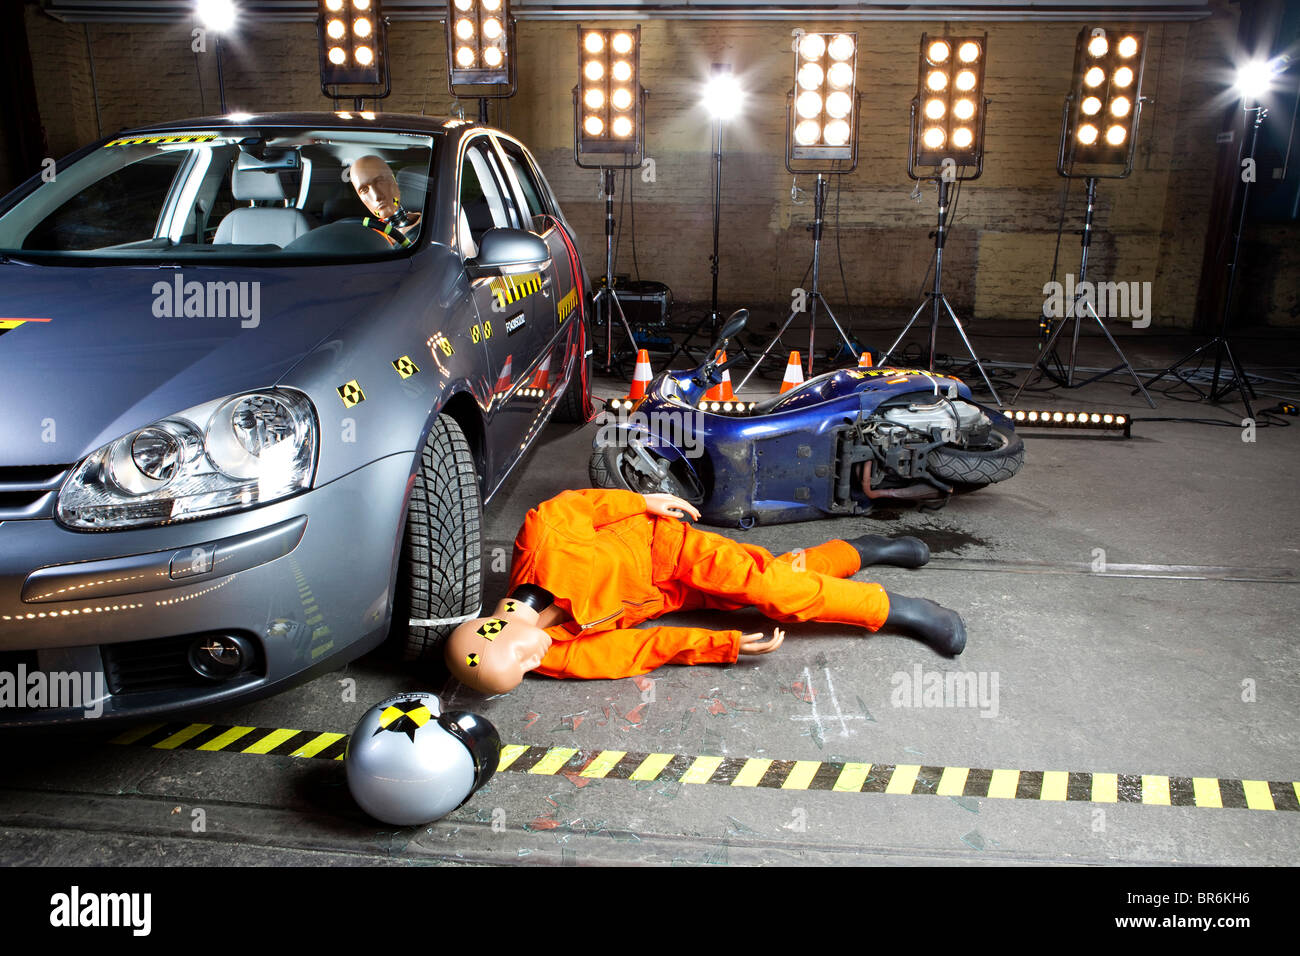 A crash test dummy on ground after scooter crashed into car Stock Photo